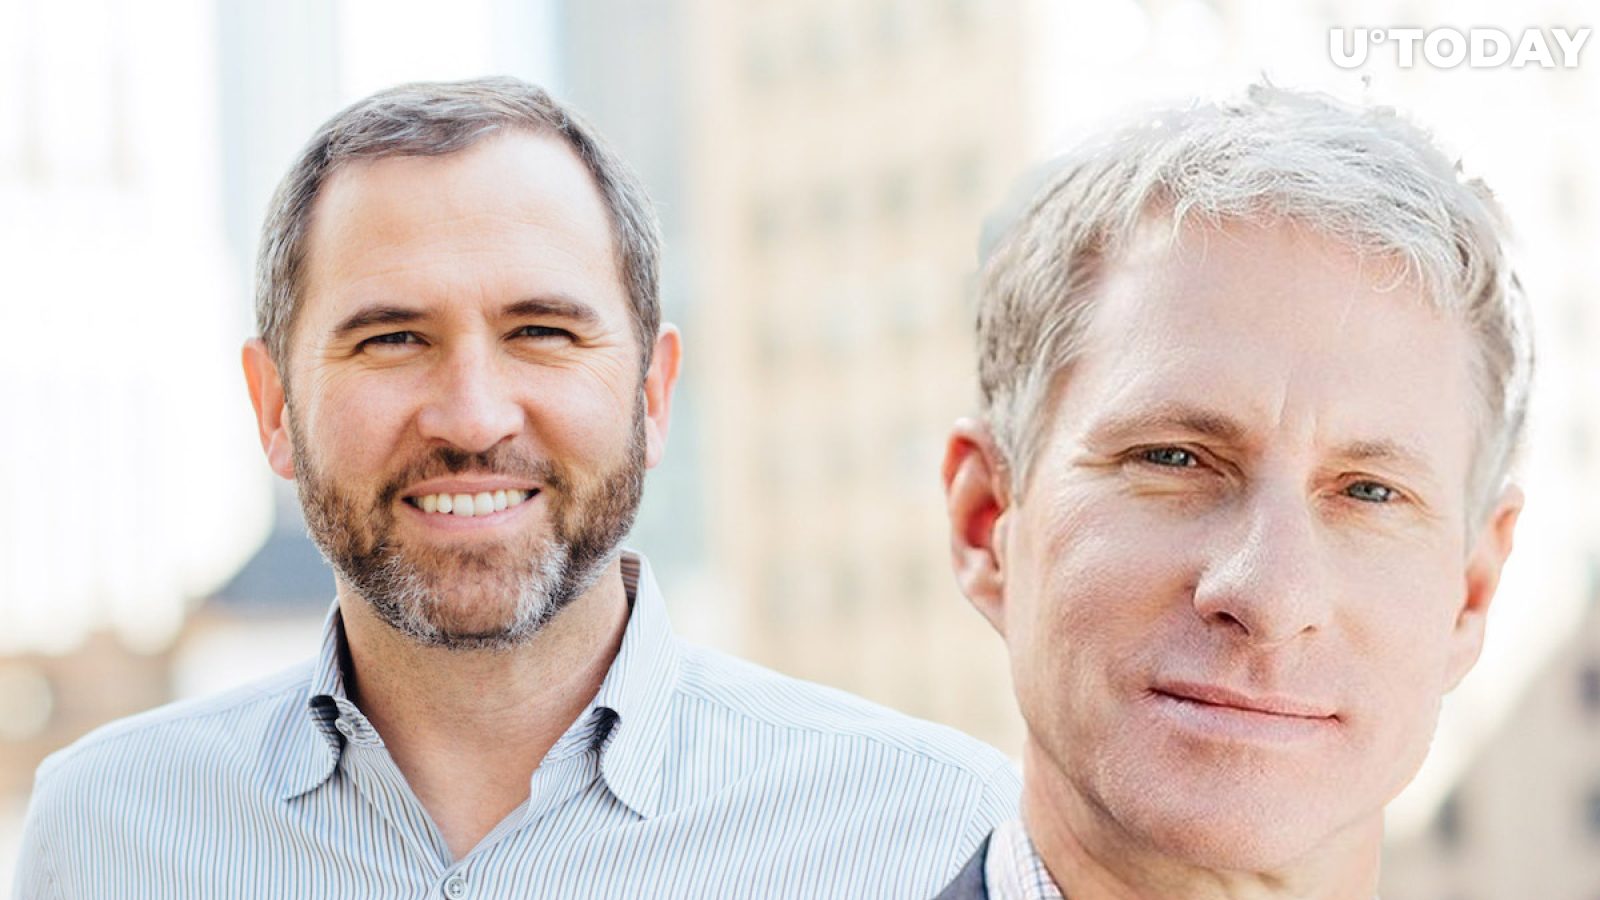 Ripple's Larsen, Garlinghouse Finally Allowed to File a Motion to Dismiss the Cases Against Them